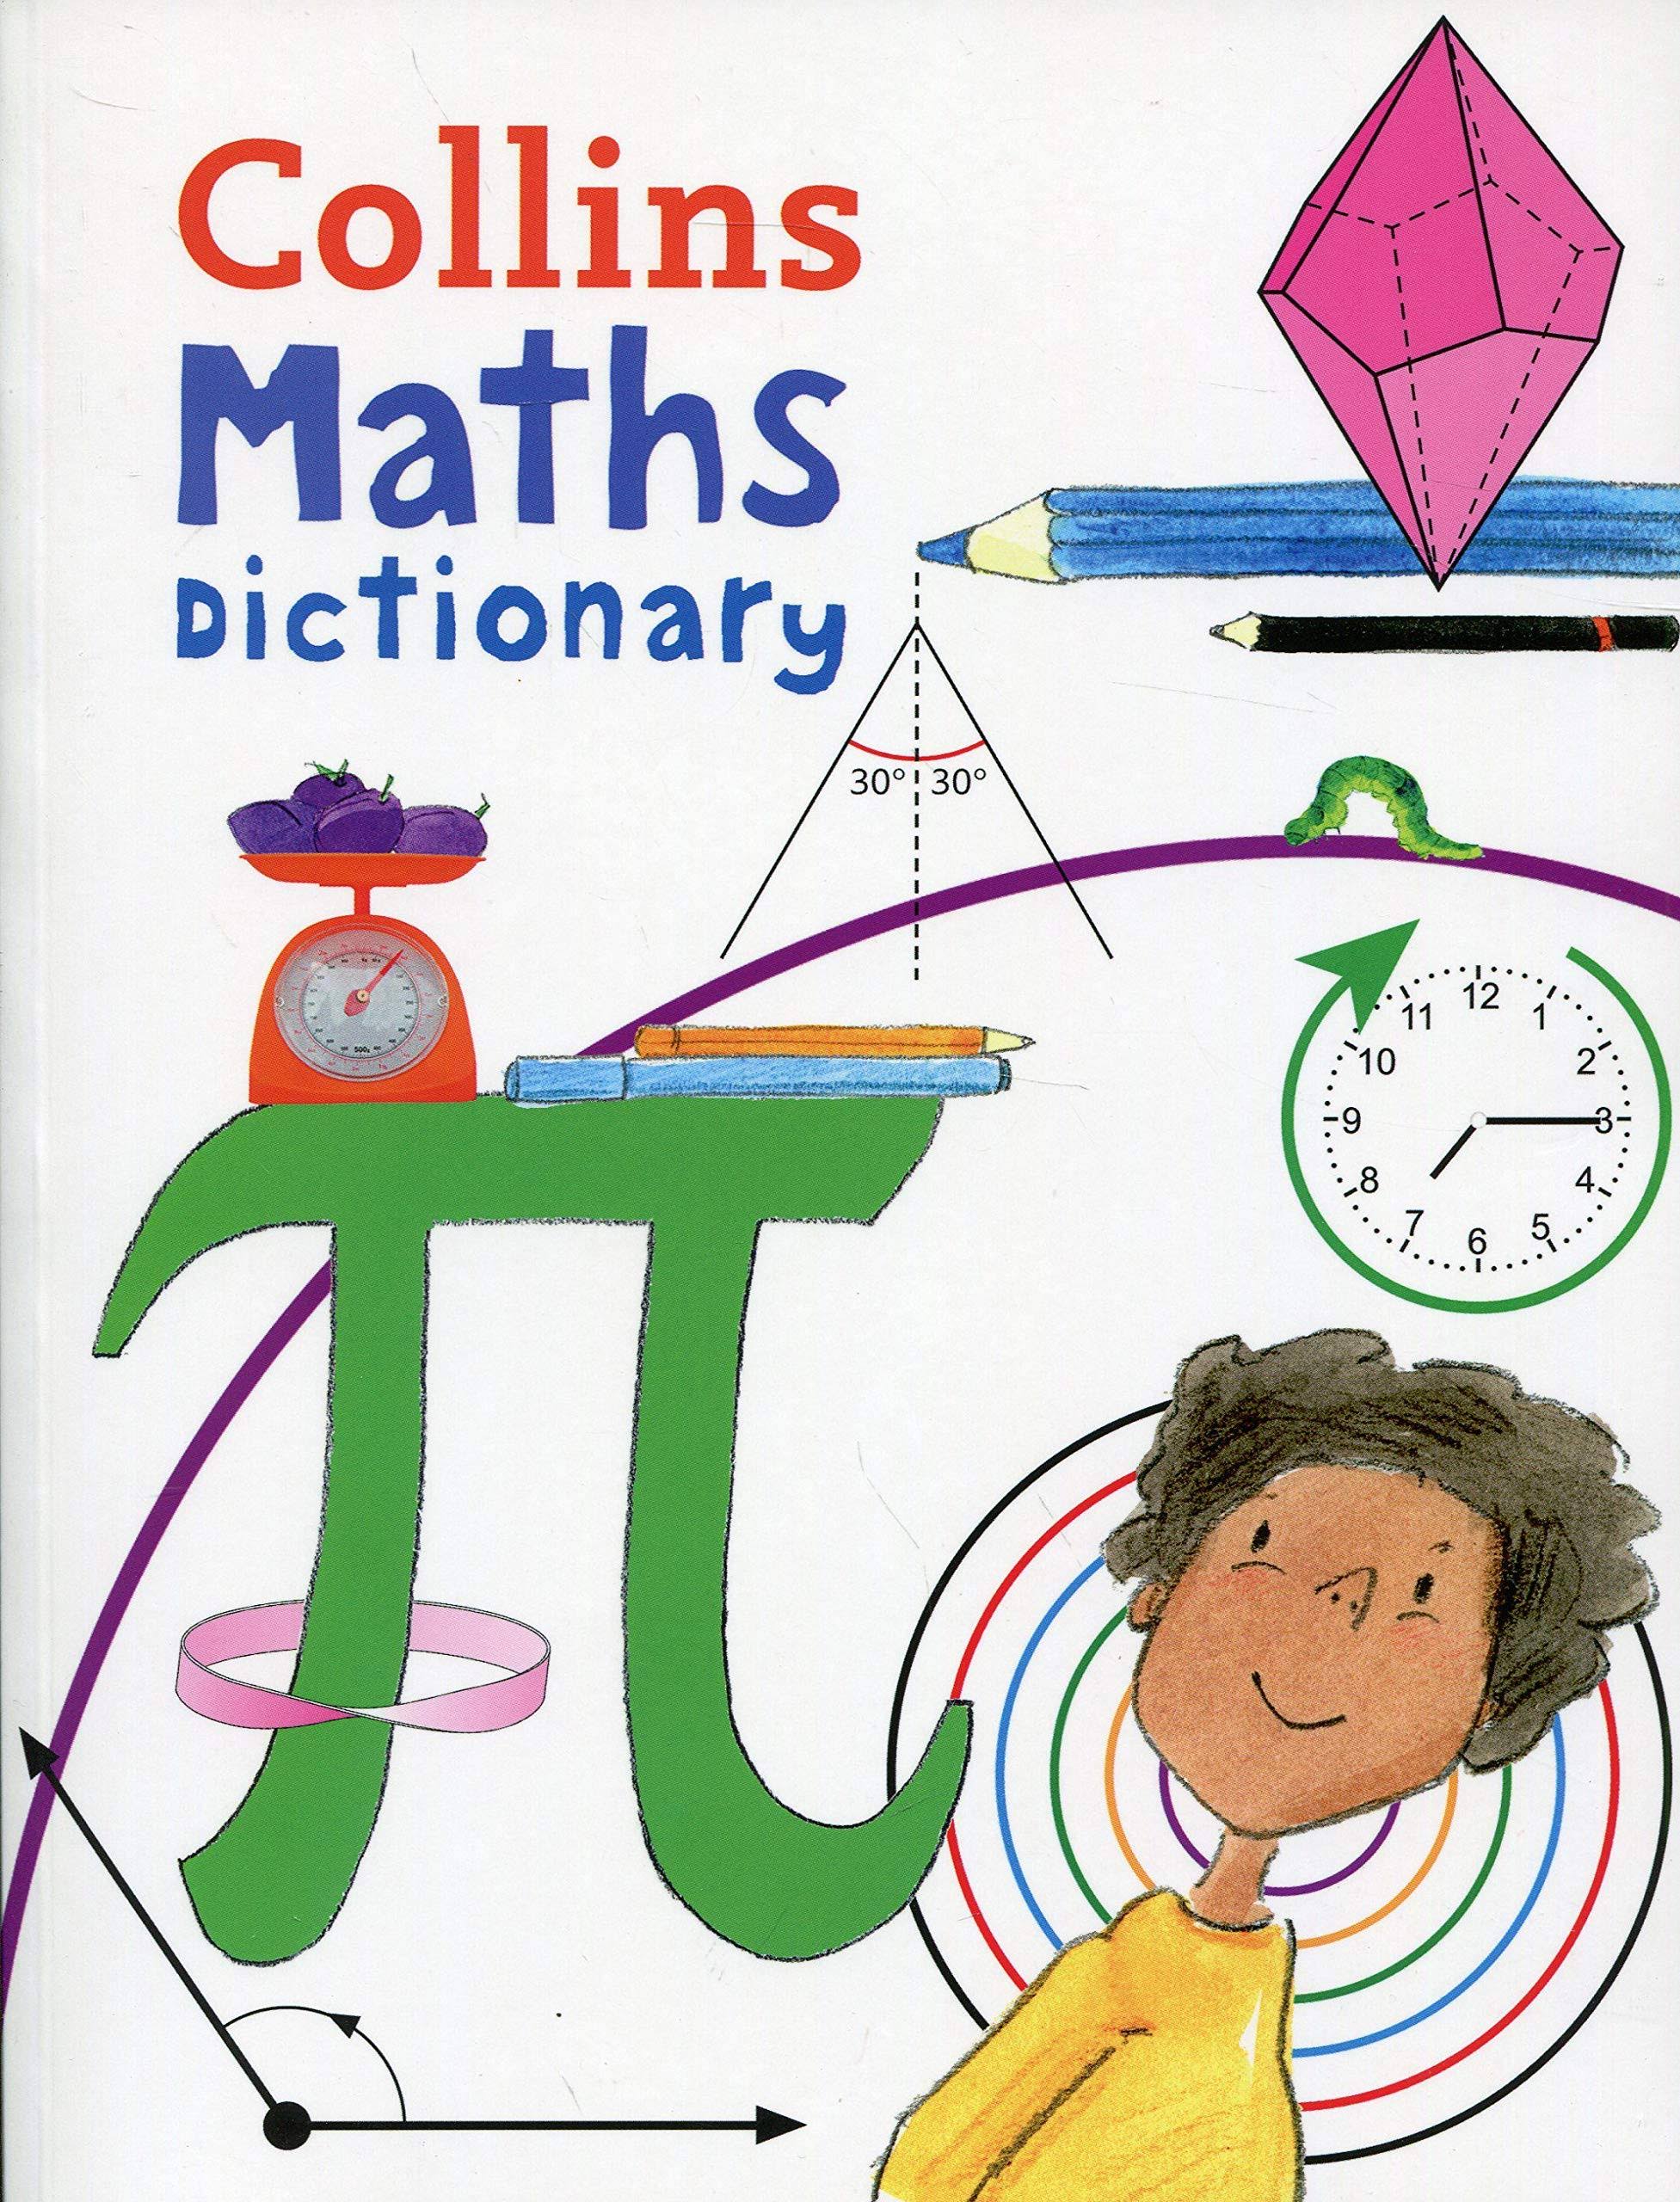 Collins Maths Dictionary [Book]